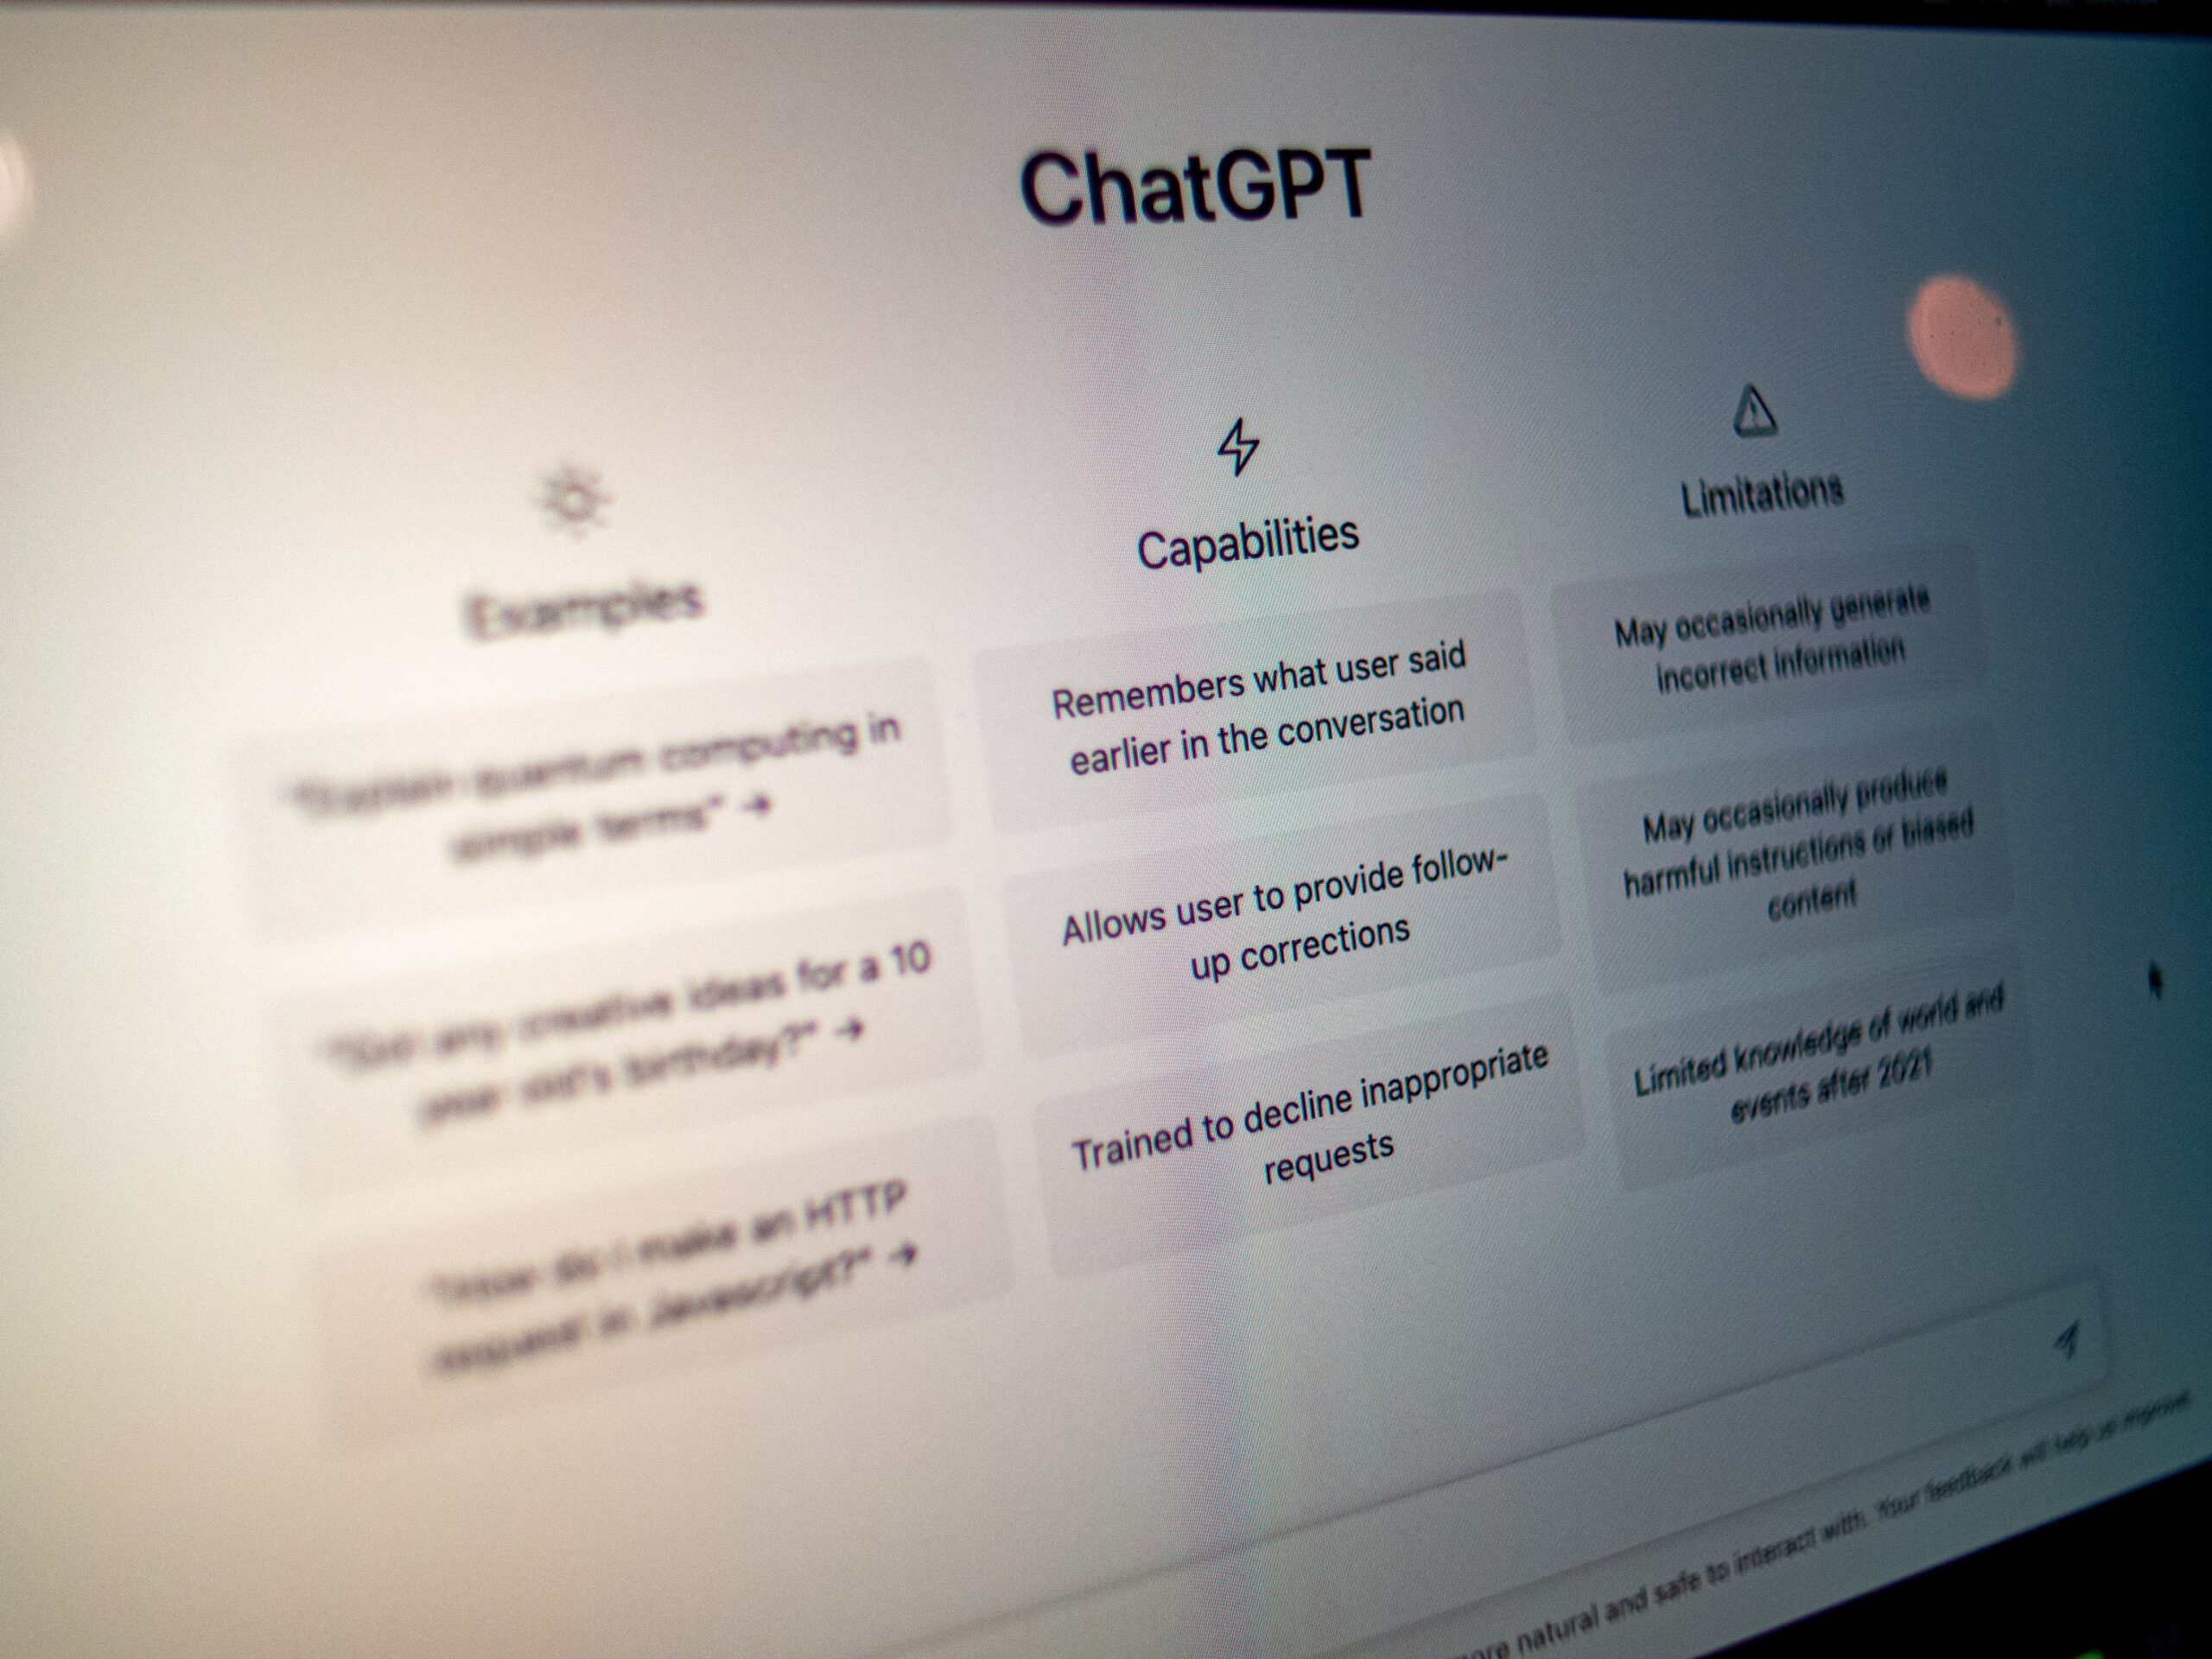 How to Ethically Use ChatGPT for Assignments